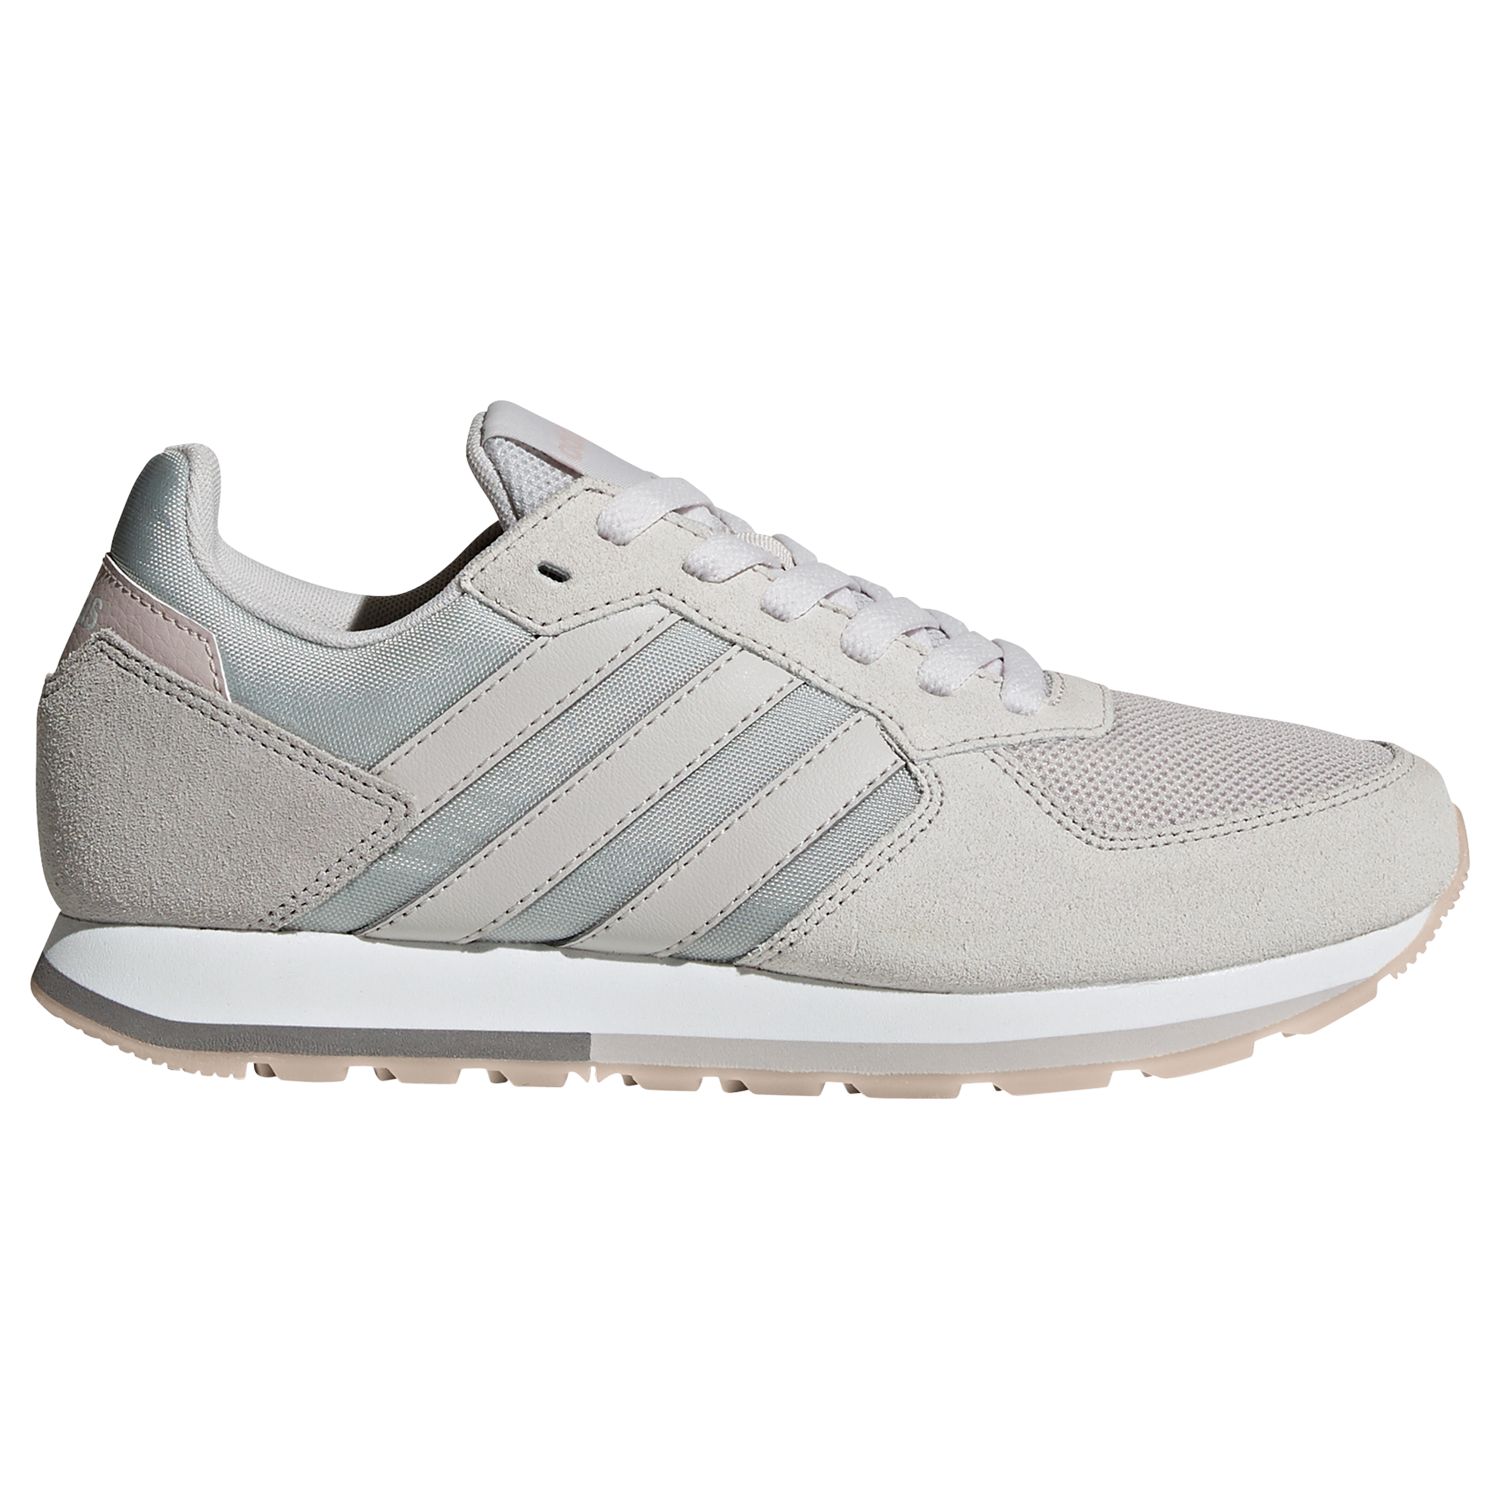 adidas Neo 8K Casual Women's Trainers 